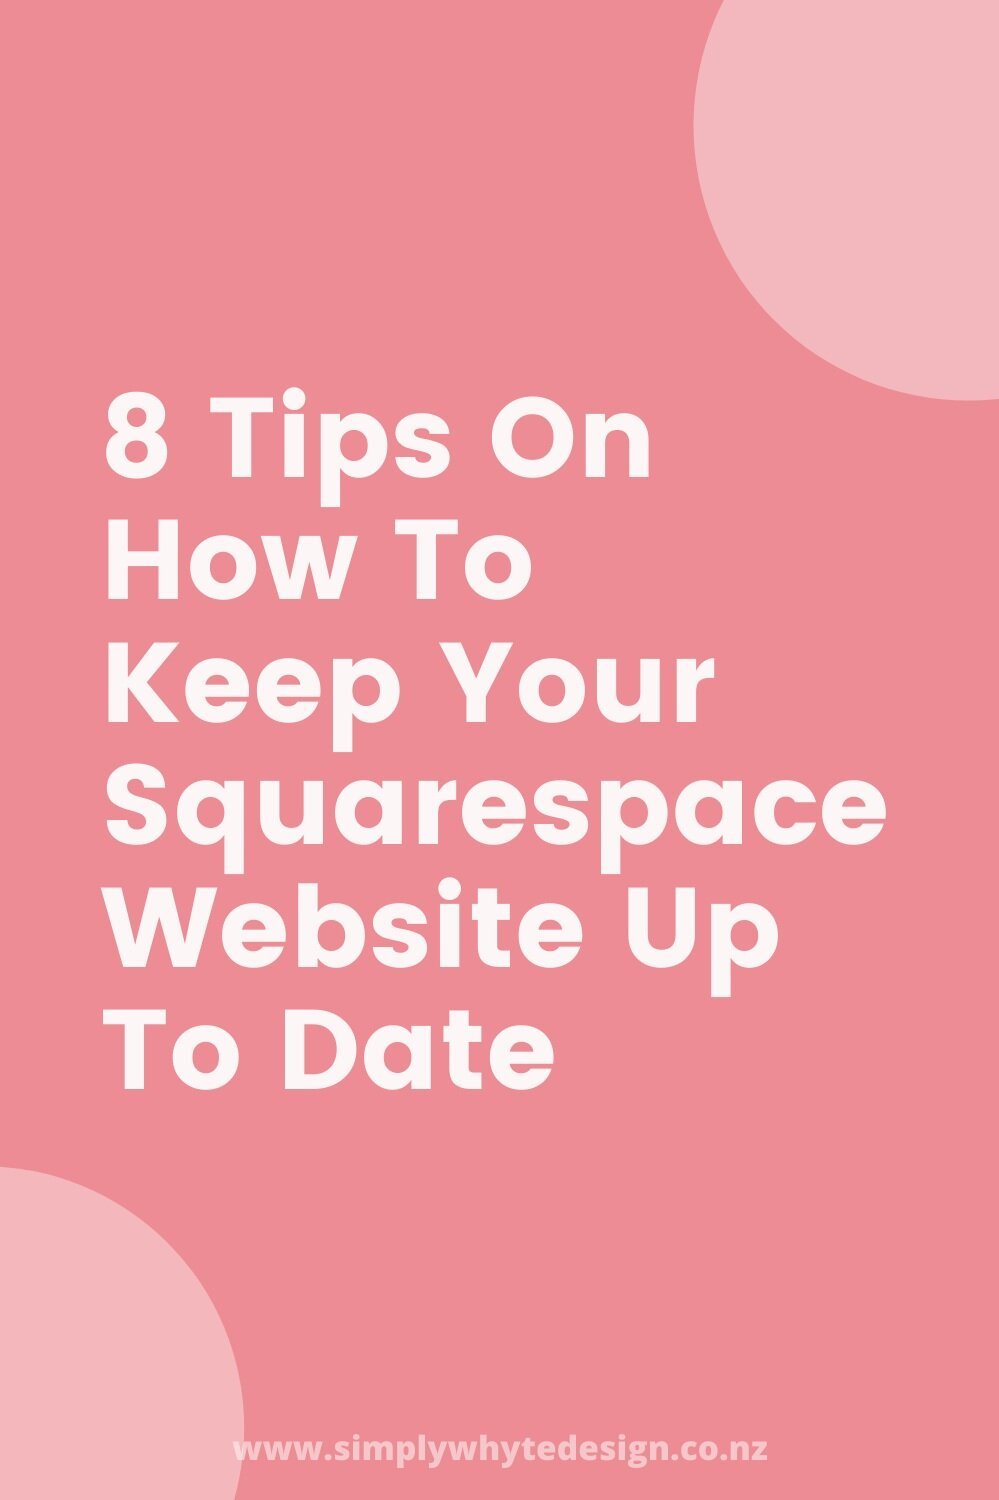 how+to+keep+your+squarespace+up+to+date.jpg